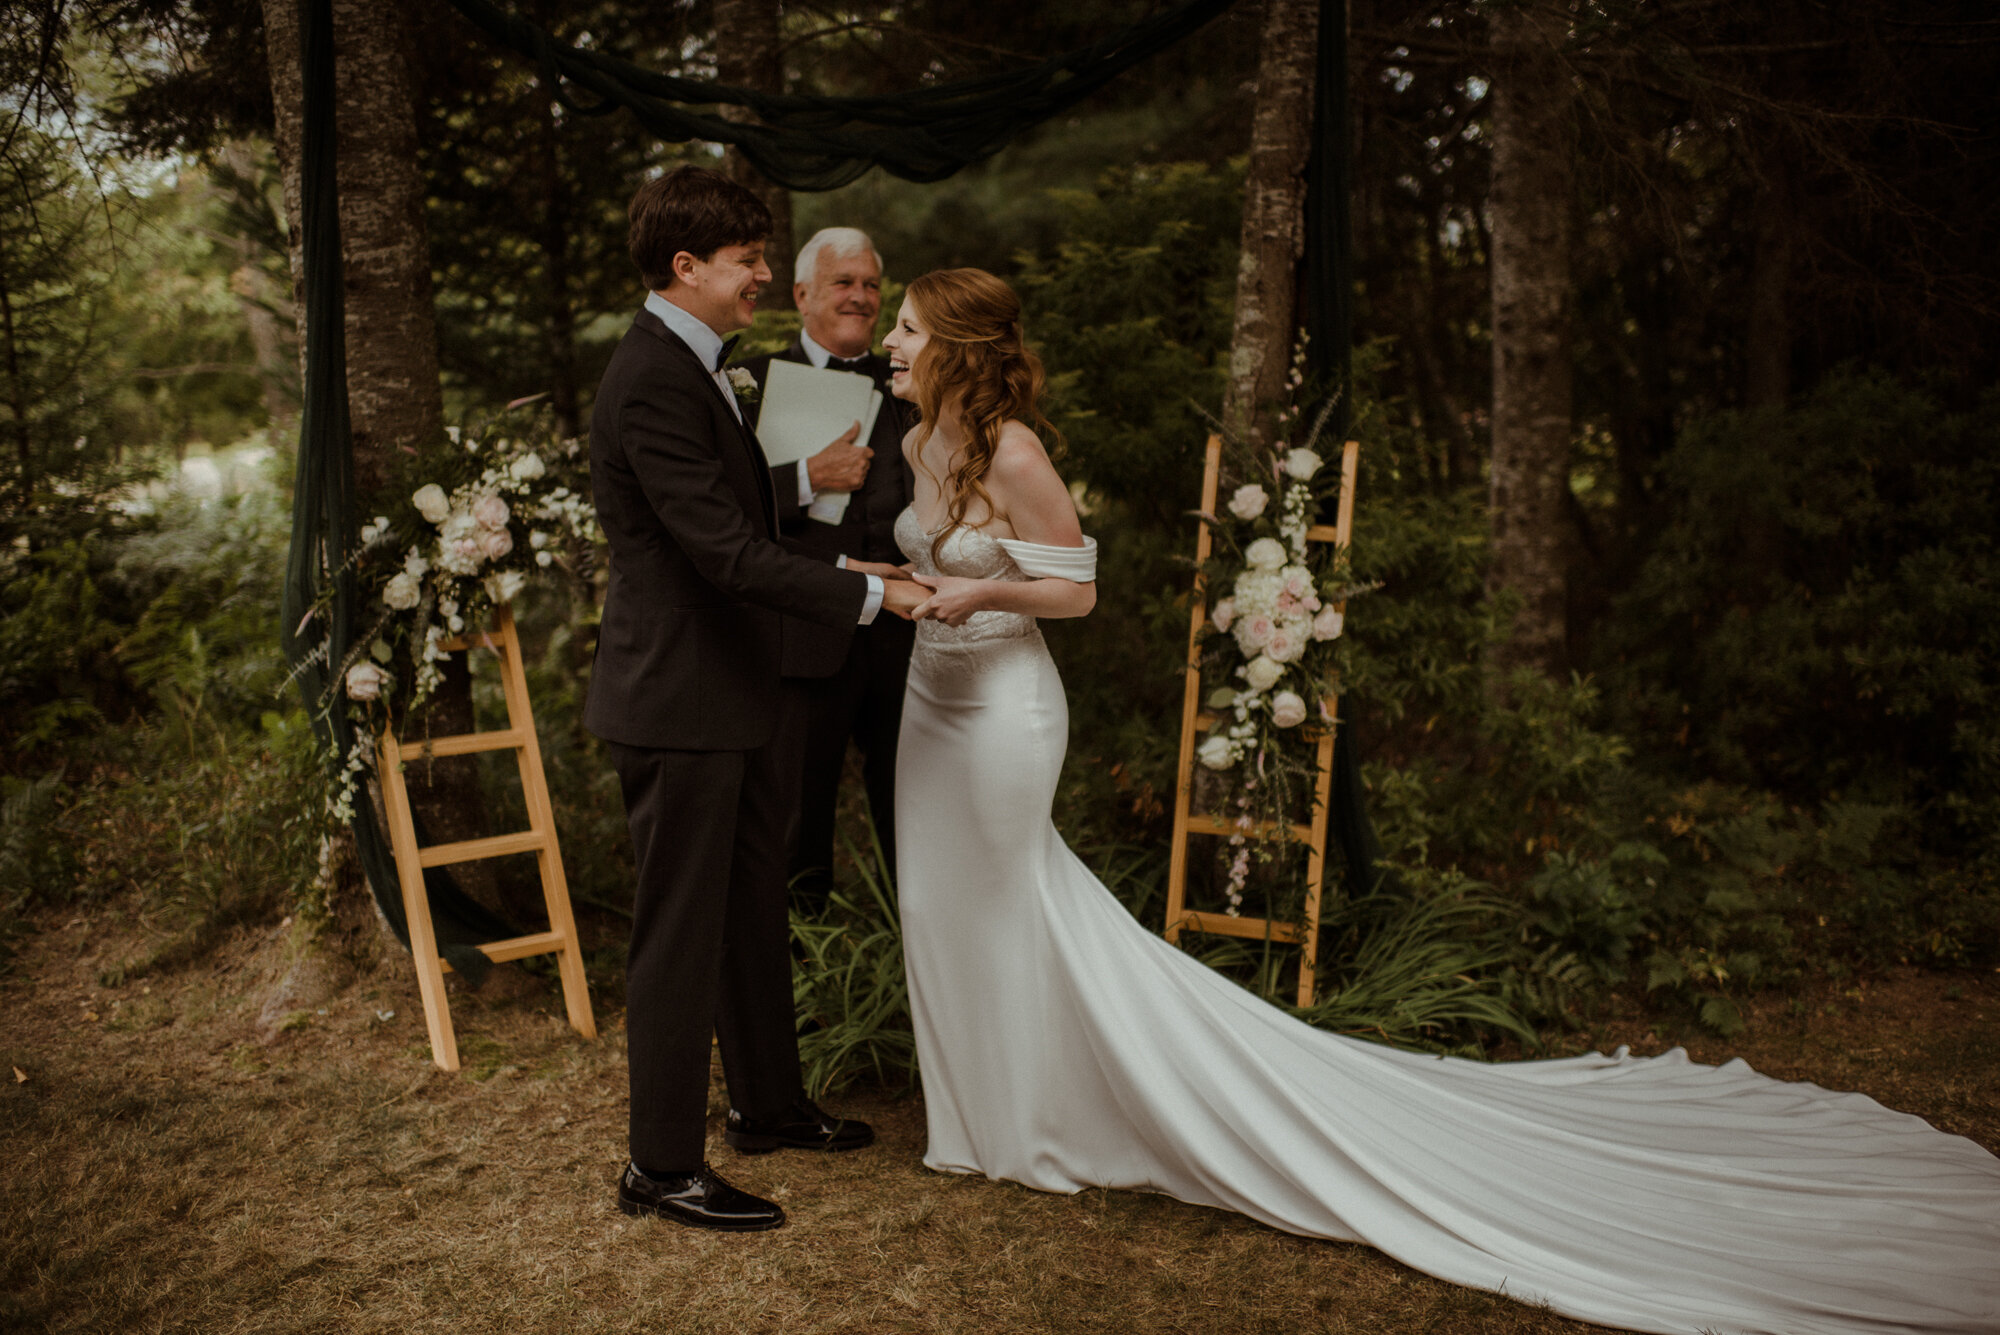 Autumn Elopement in New Hampshire - Backyard Wedding during COVID and Sunrise Hike in Wedding Dress - White Sails Creative_58.jpg